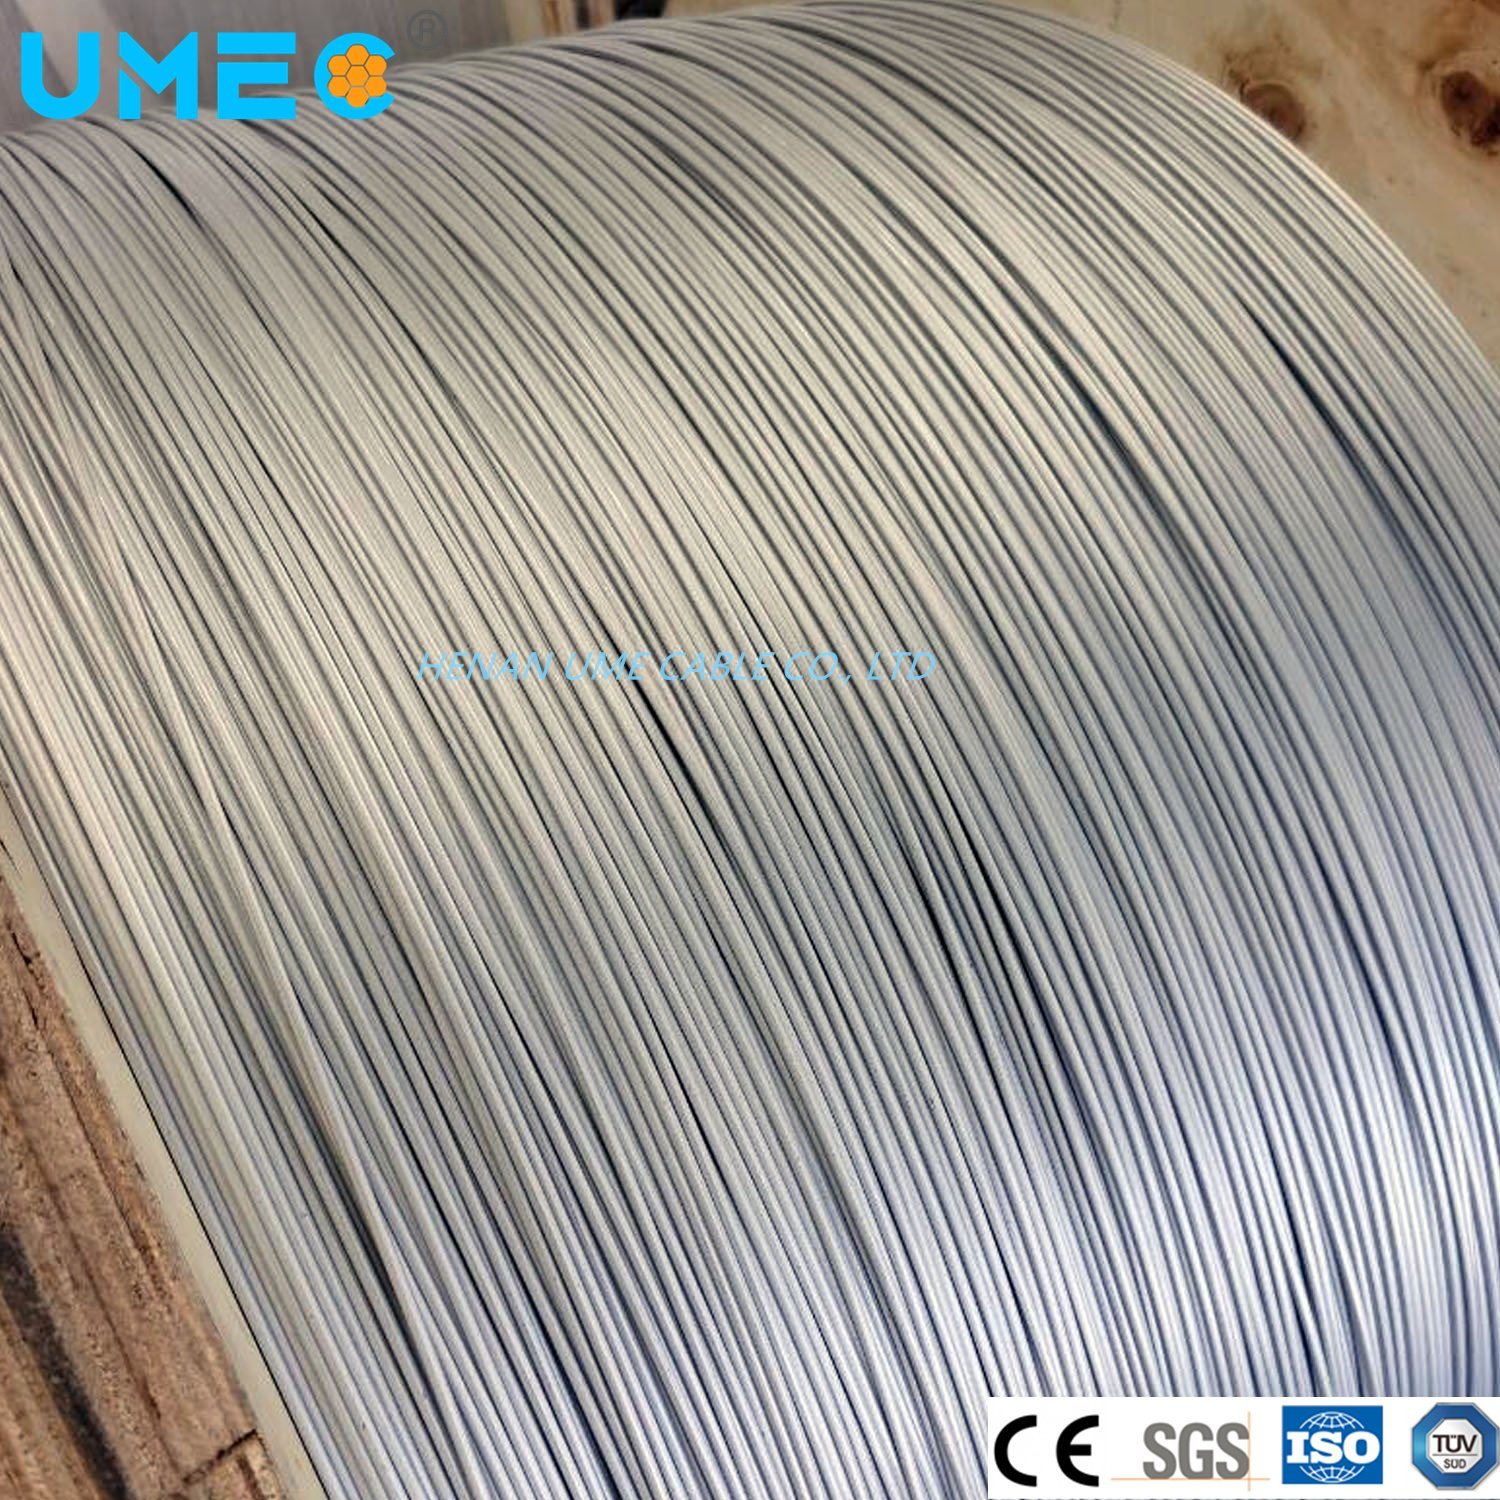 Optical Ground Wire (OPGW) Alumoweld Aluminum Clad Steel Single and Stranded Wire Acs 7X2.59mm